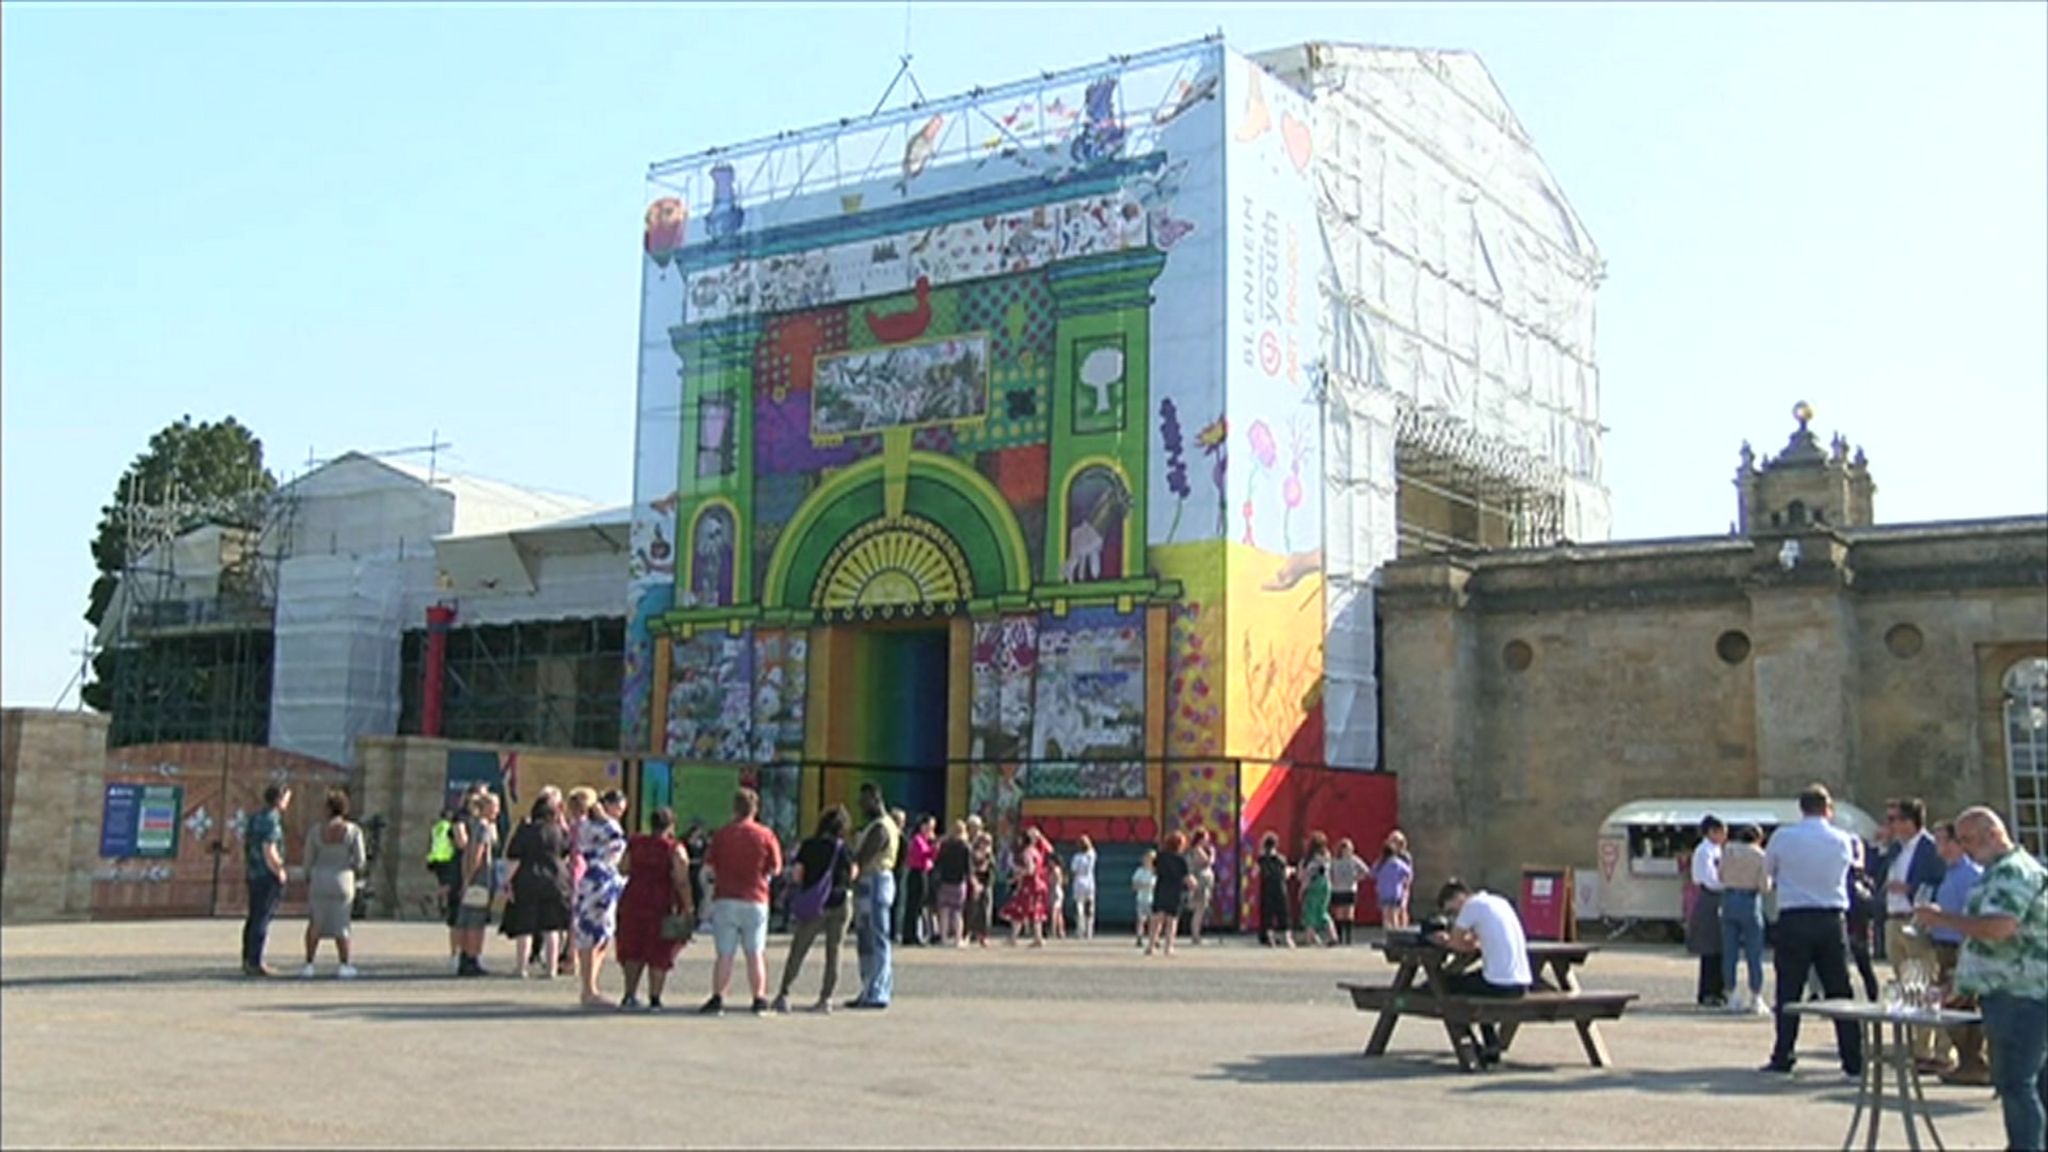 People admiring the mural at the Flagstaff Gate